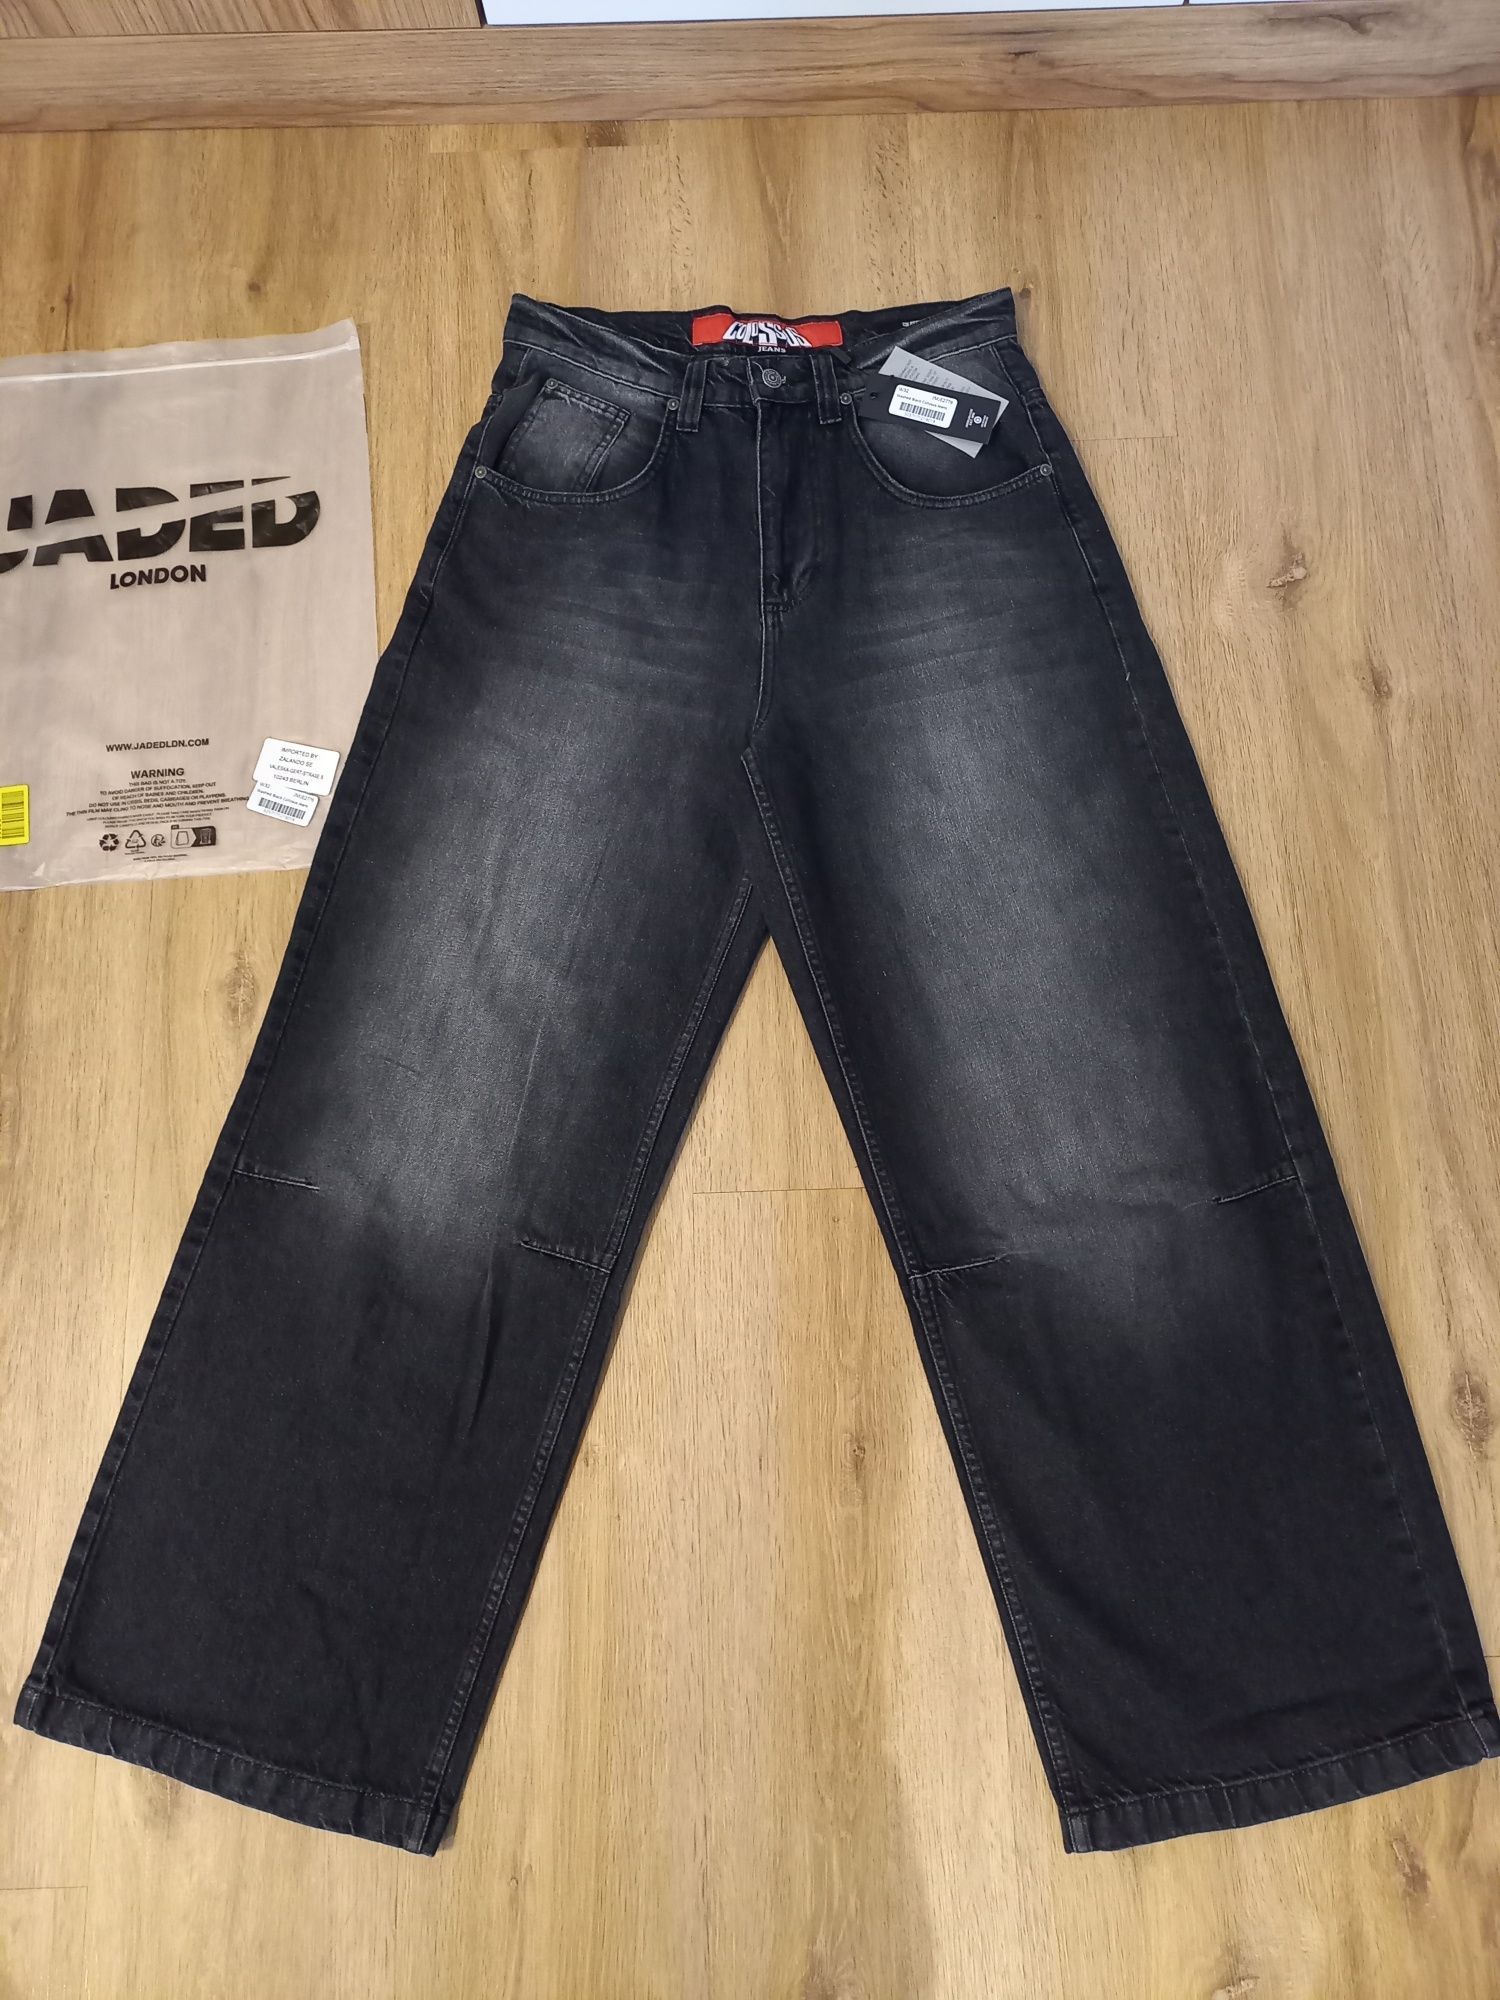 Jaded London Jeansy Washed Black Colossus Jeans Relaxed Fit W32 Nowe